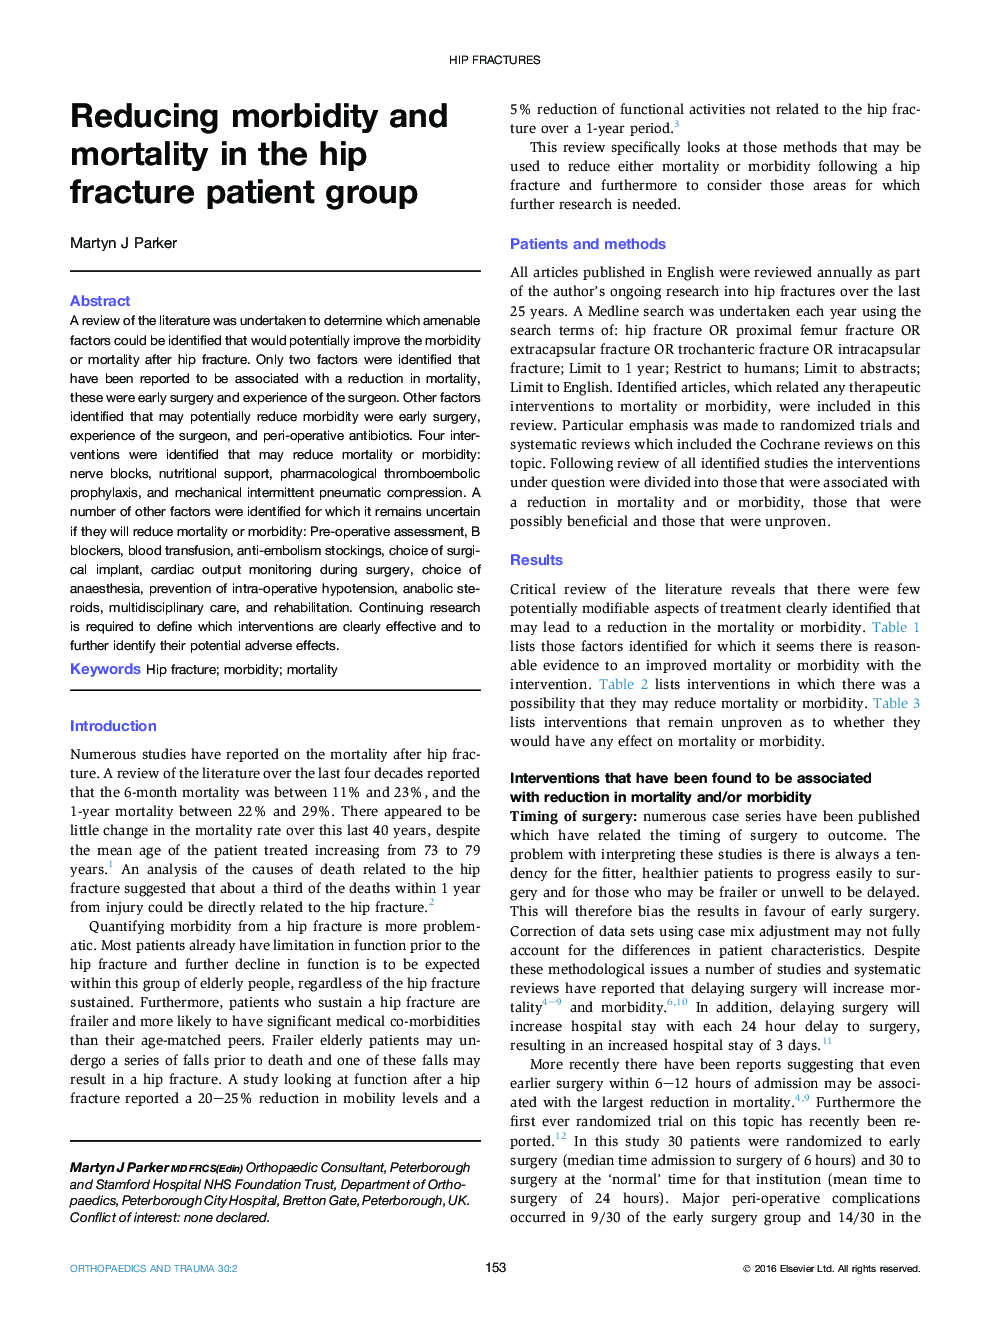 Reducing morbidity and mortality in the hip fracture patient group